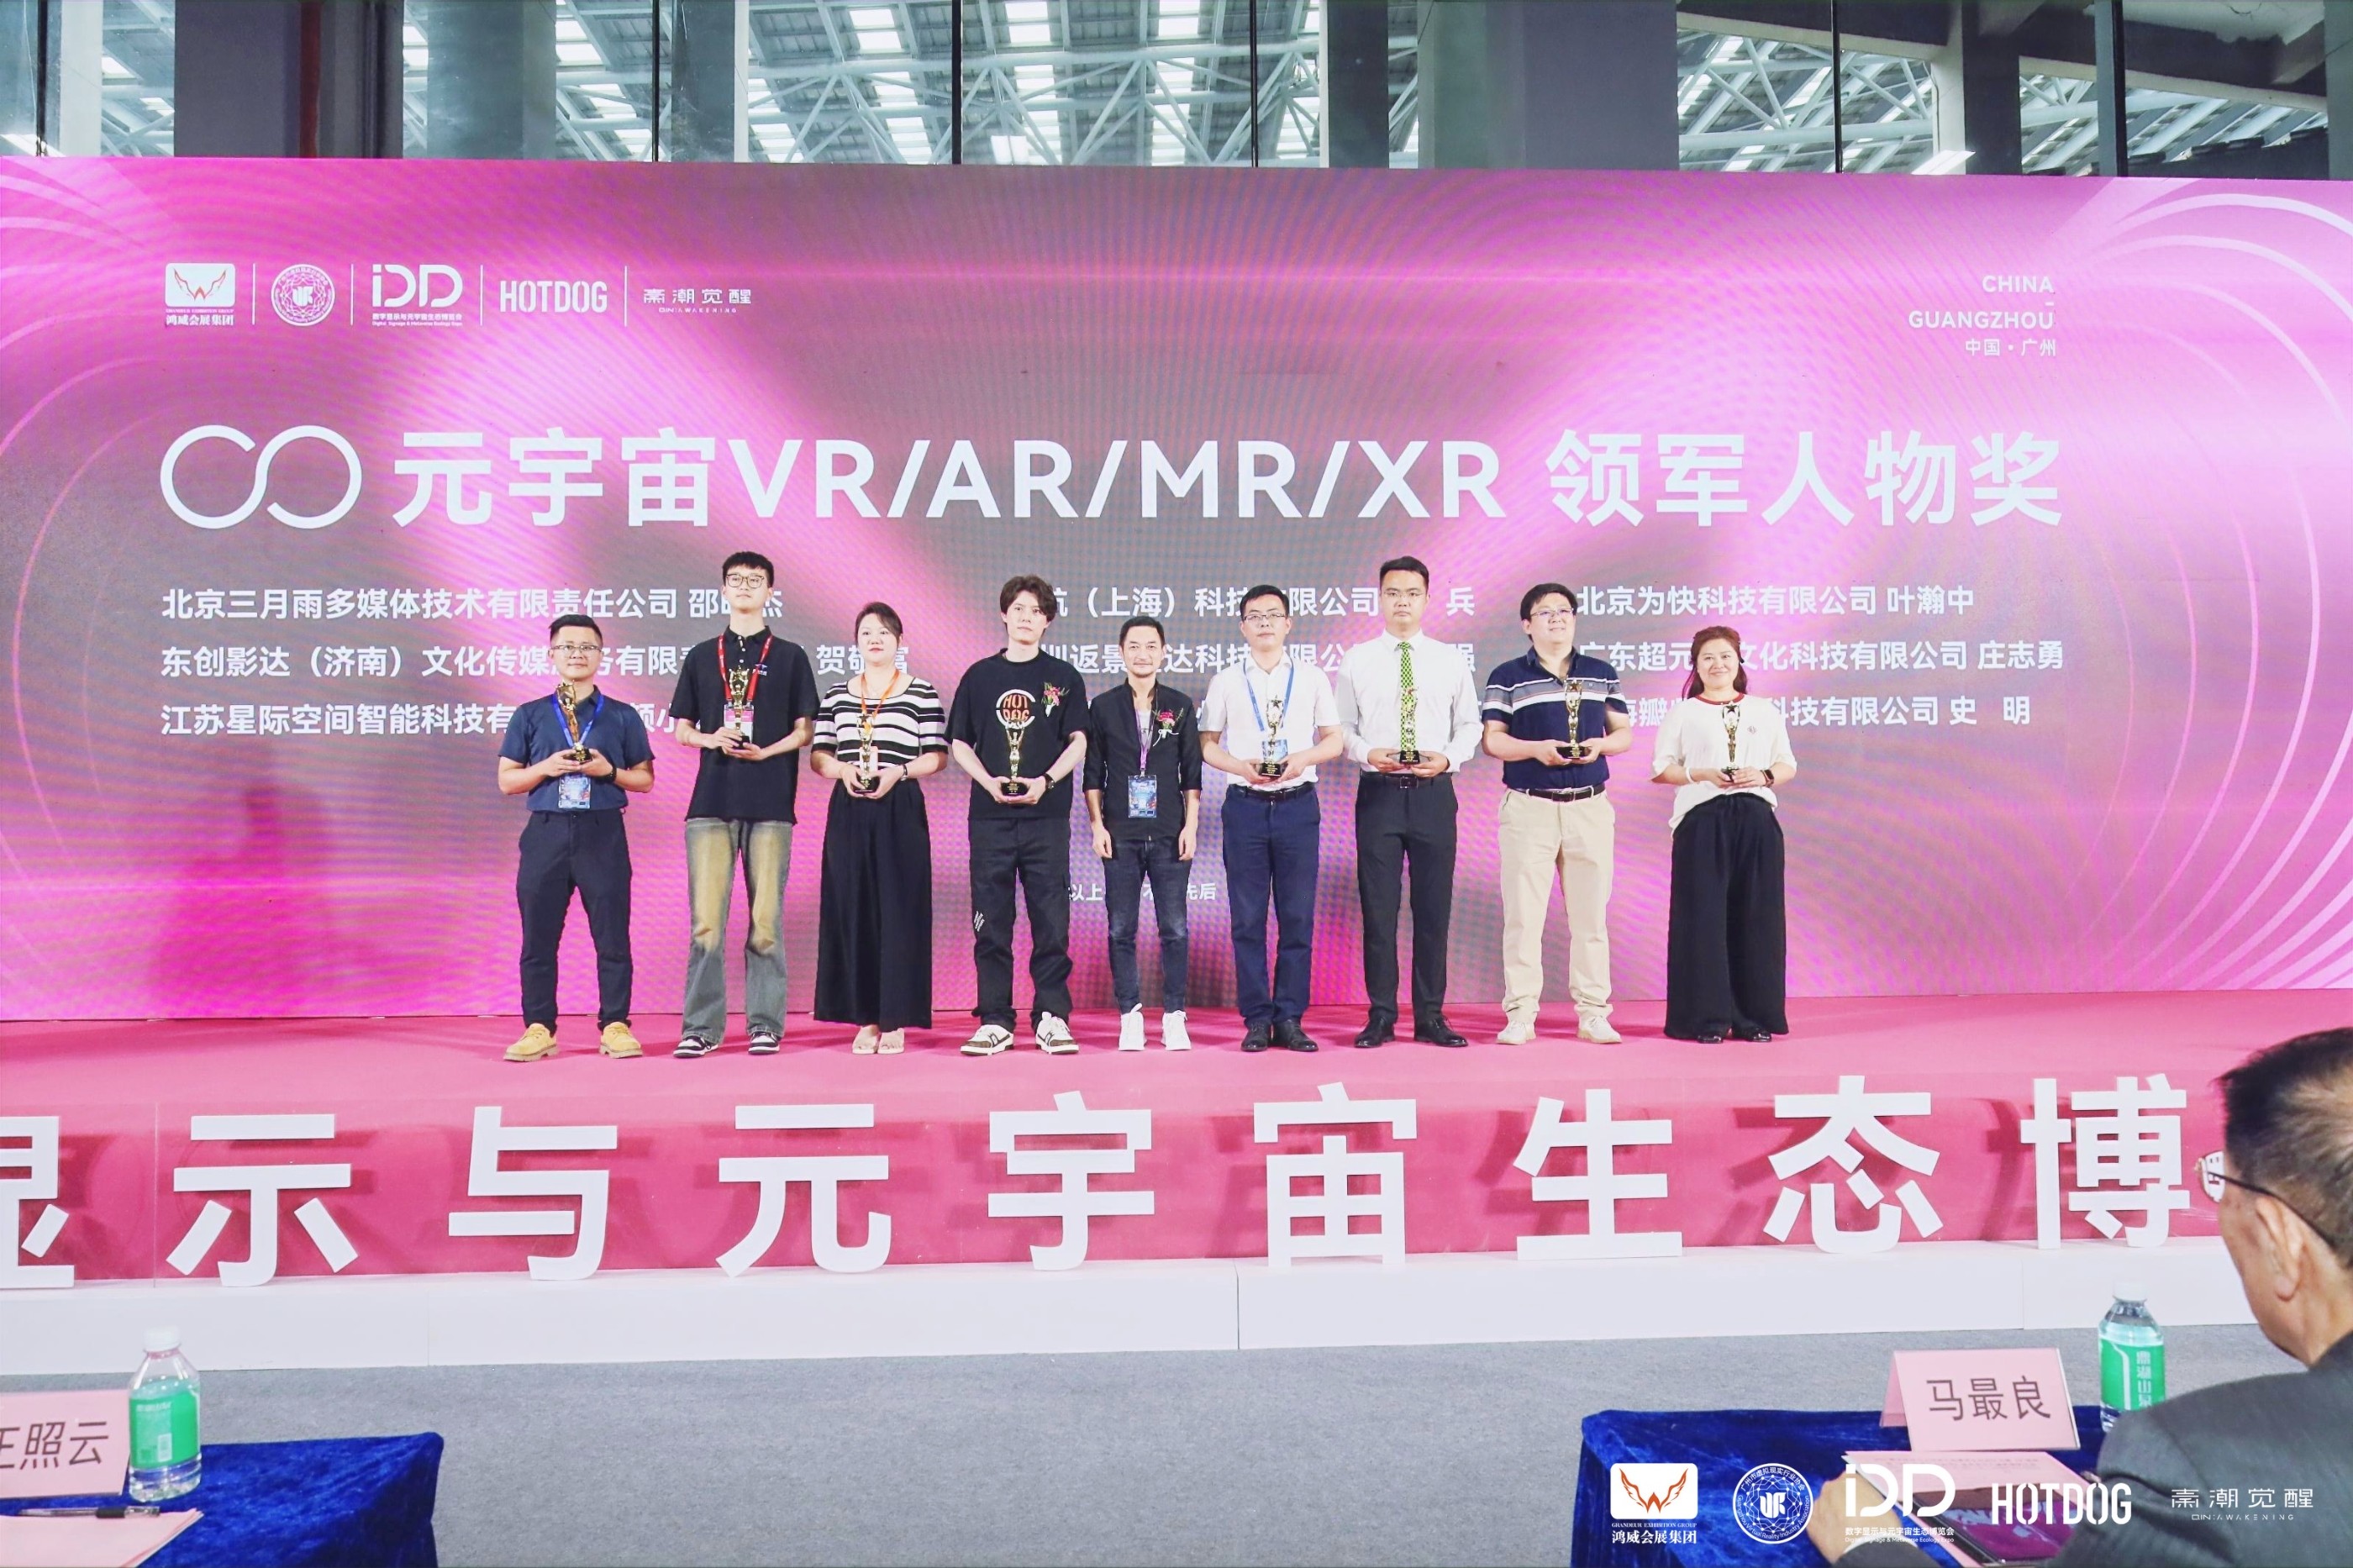 Add new light! XHOLO technology won the Meta-universe VR/AR/MR/XR Leader Award and Meta-Universe Industry Application Award